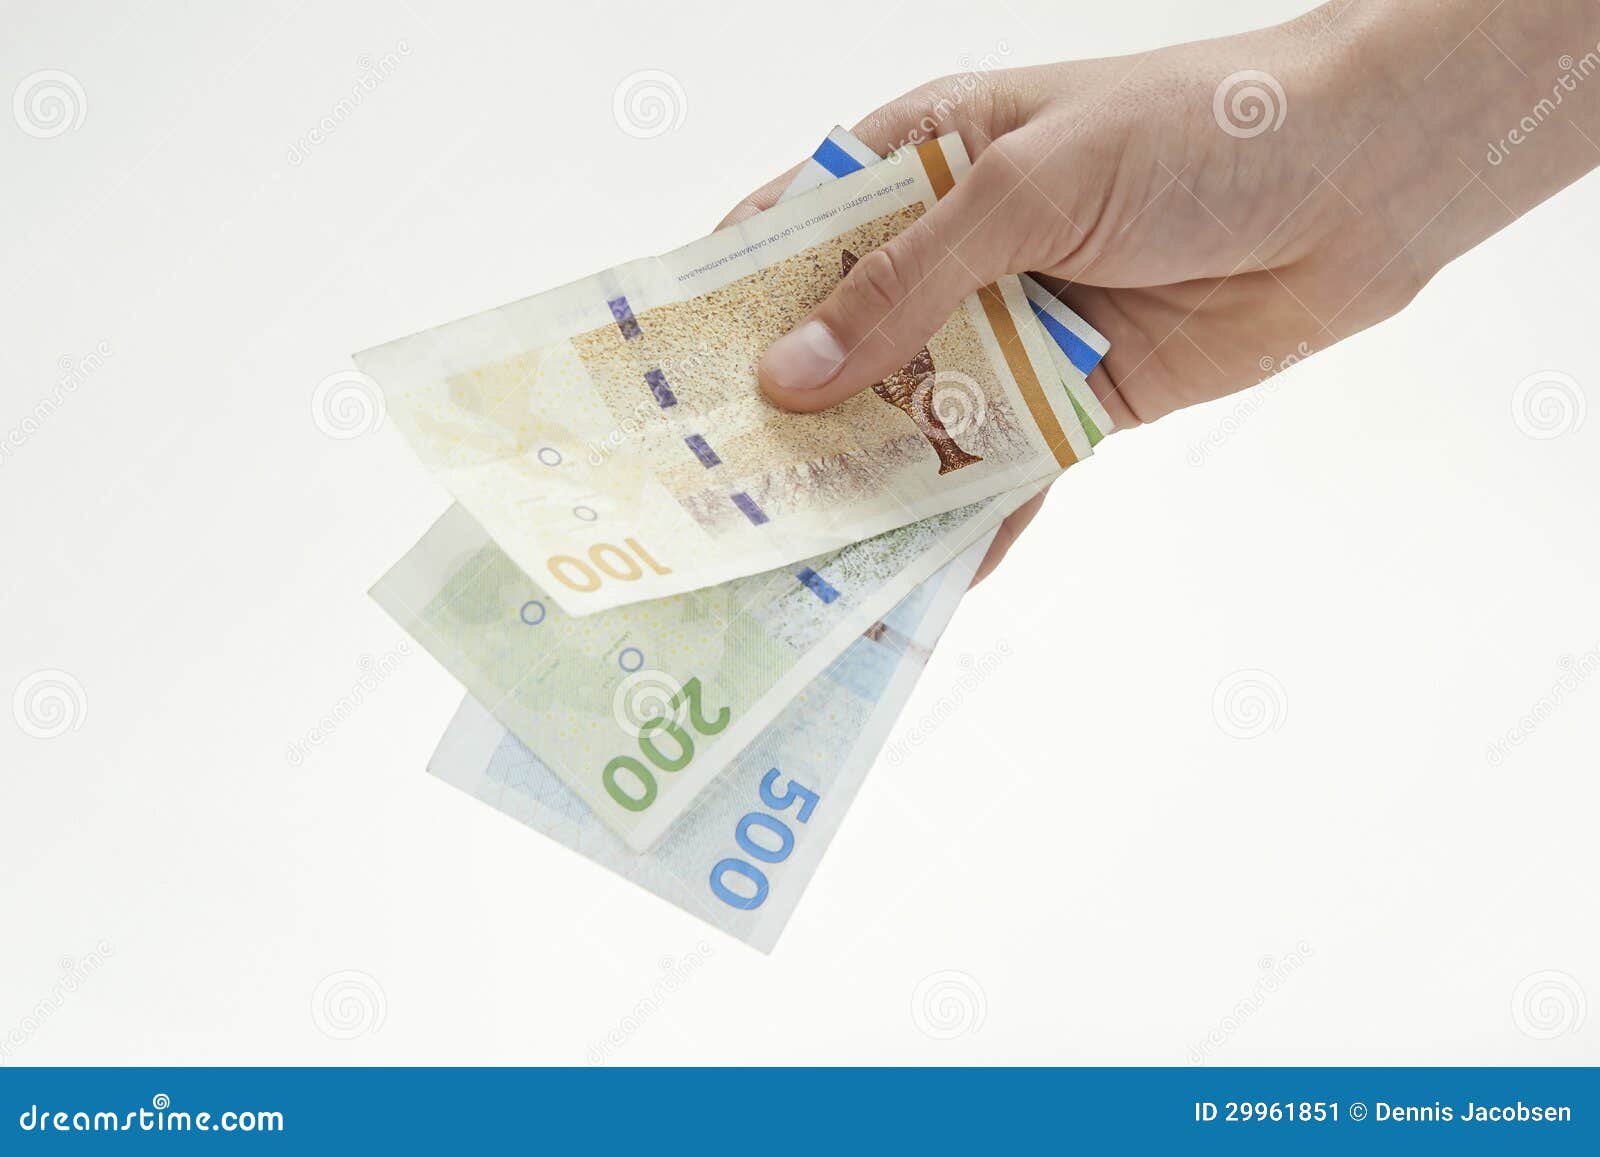 hand holding danish currency